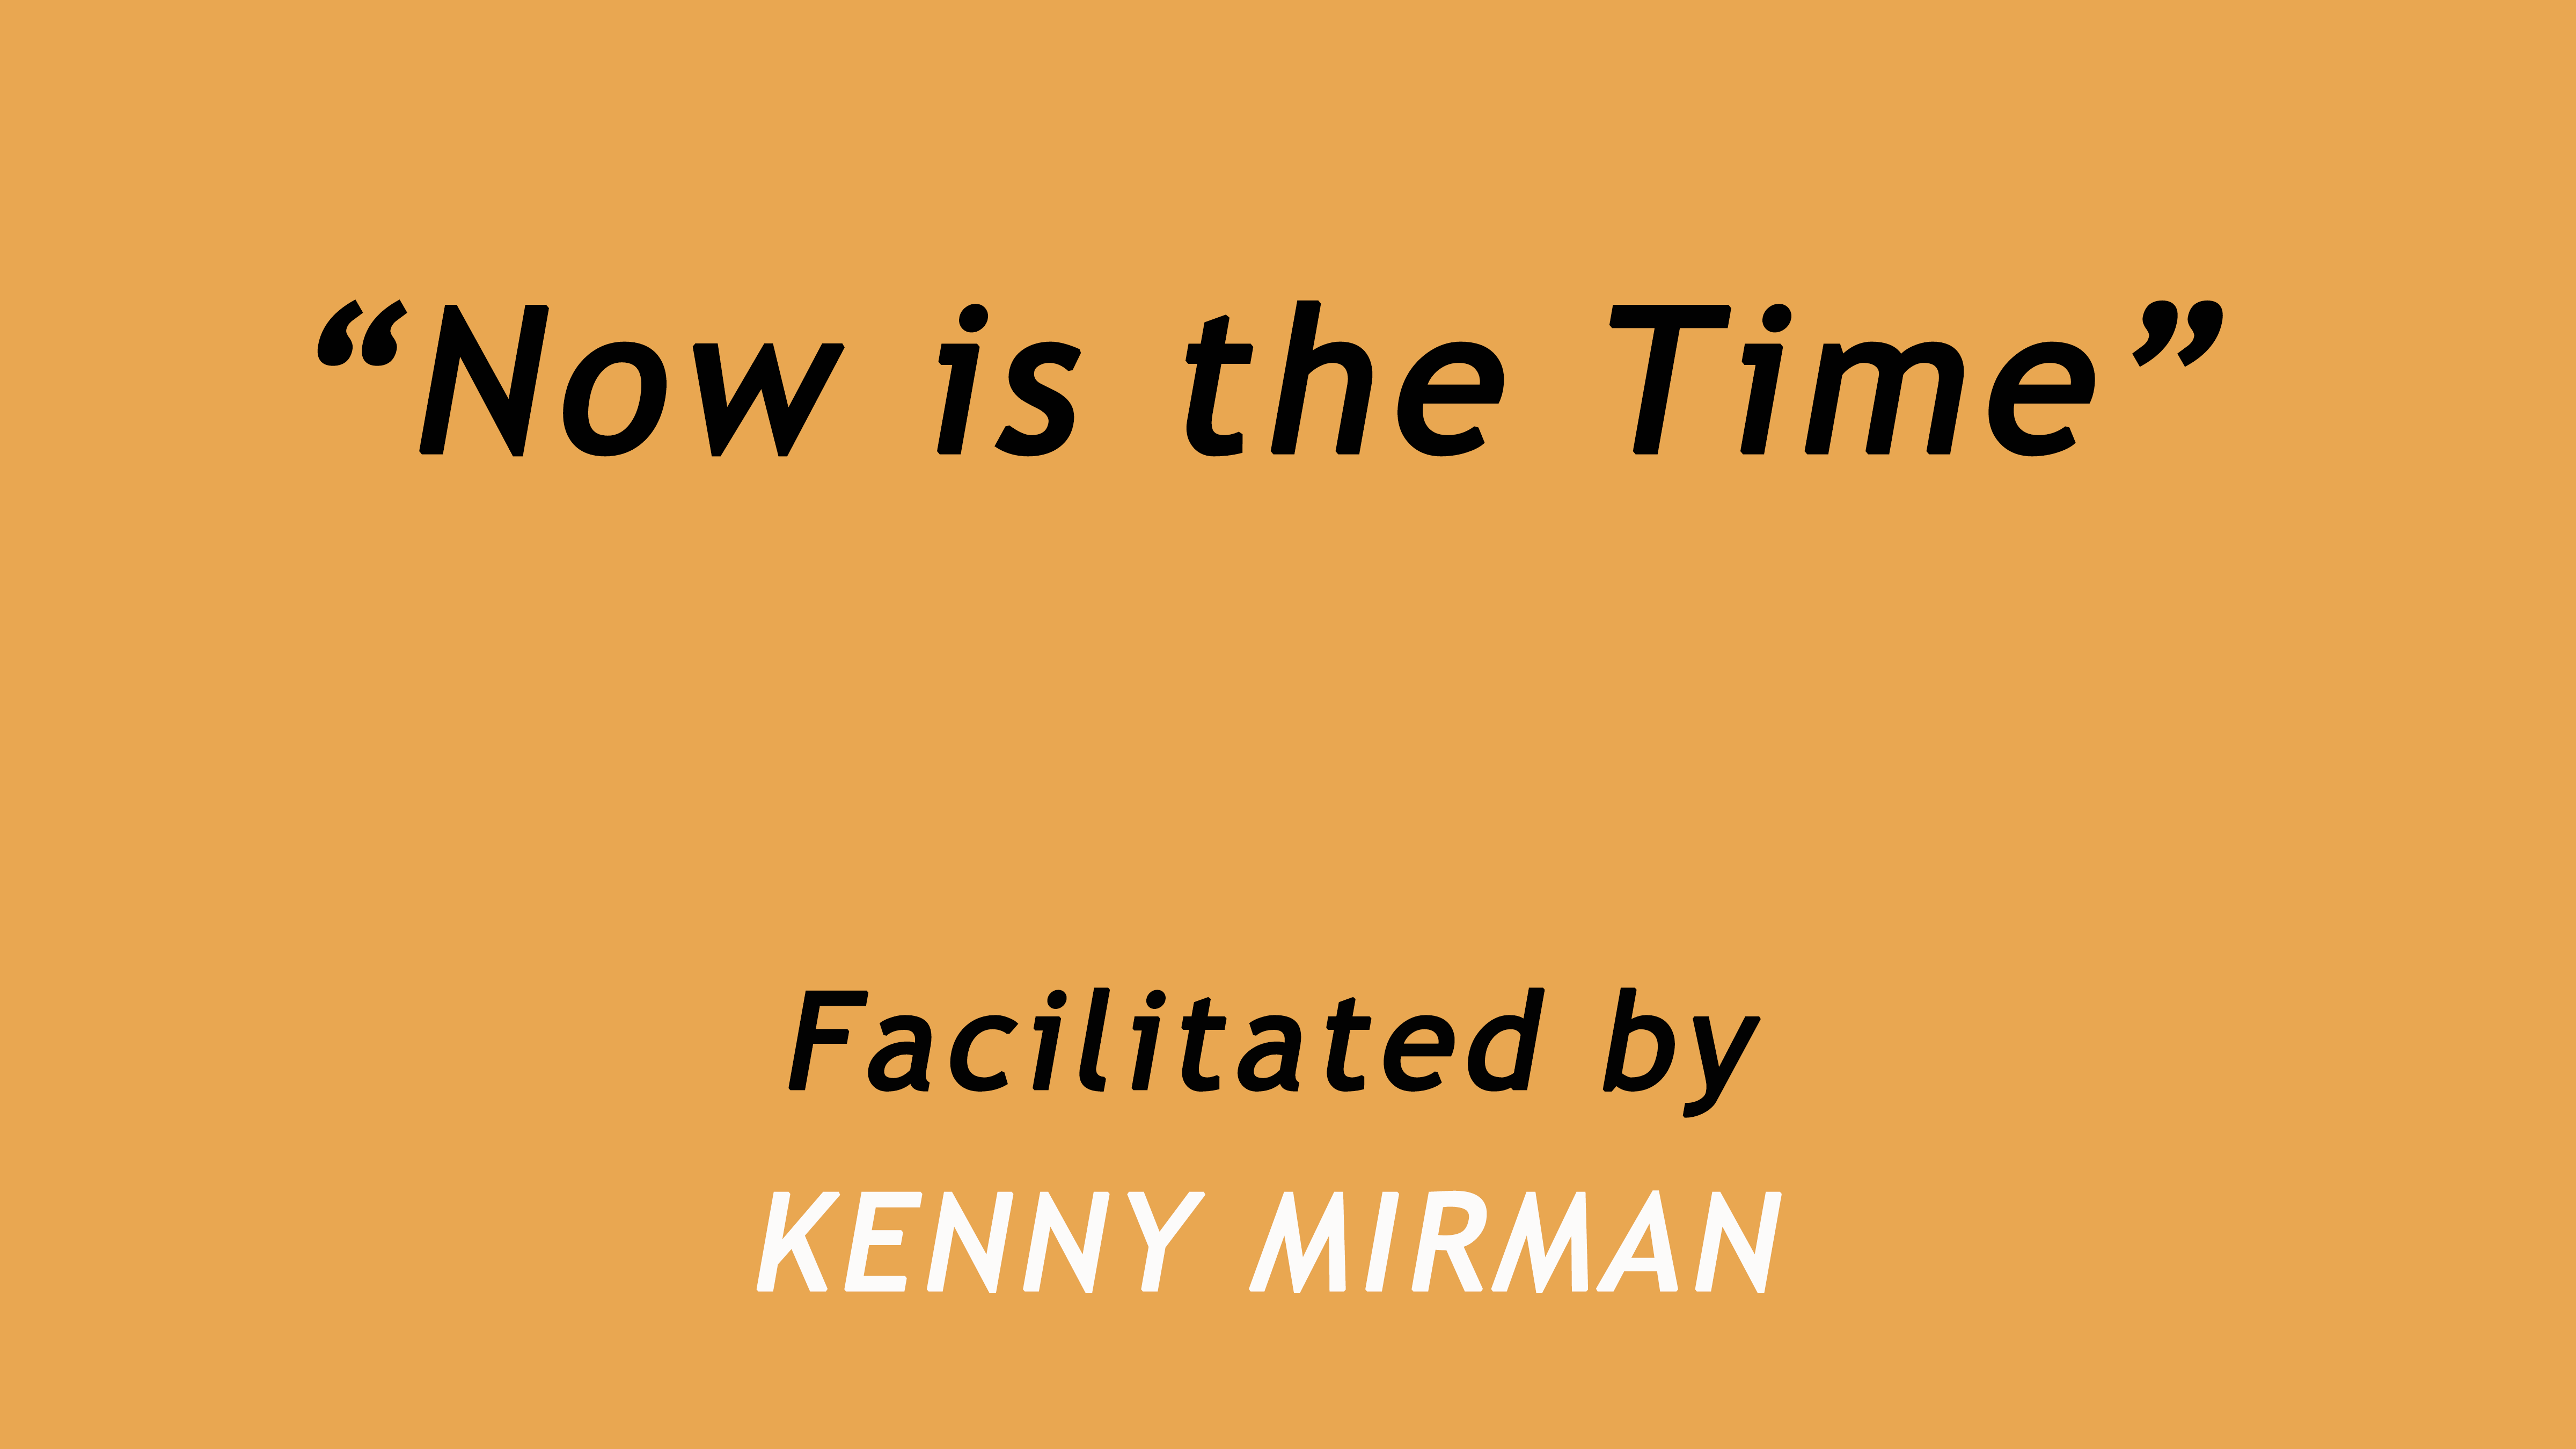 Now is the Time. Facilitated by Kenny Mirman